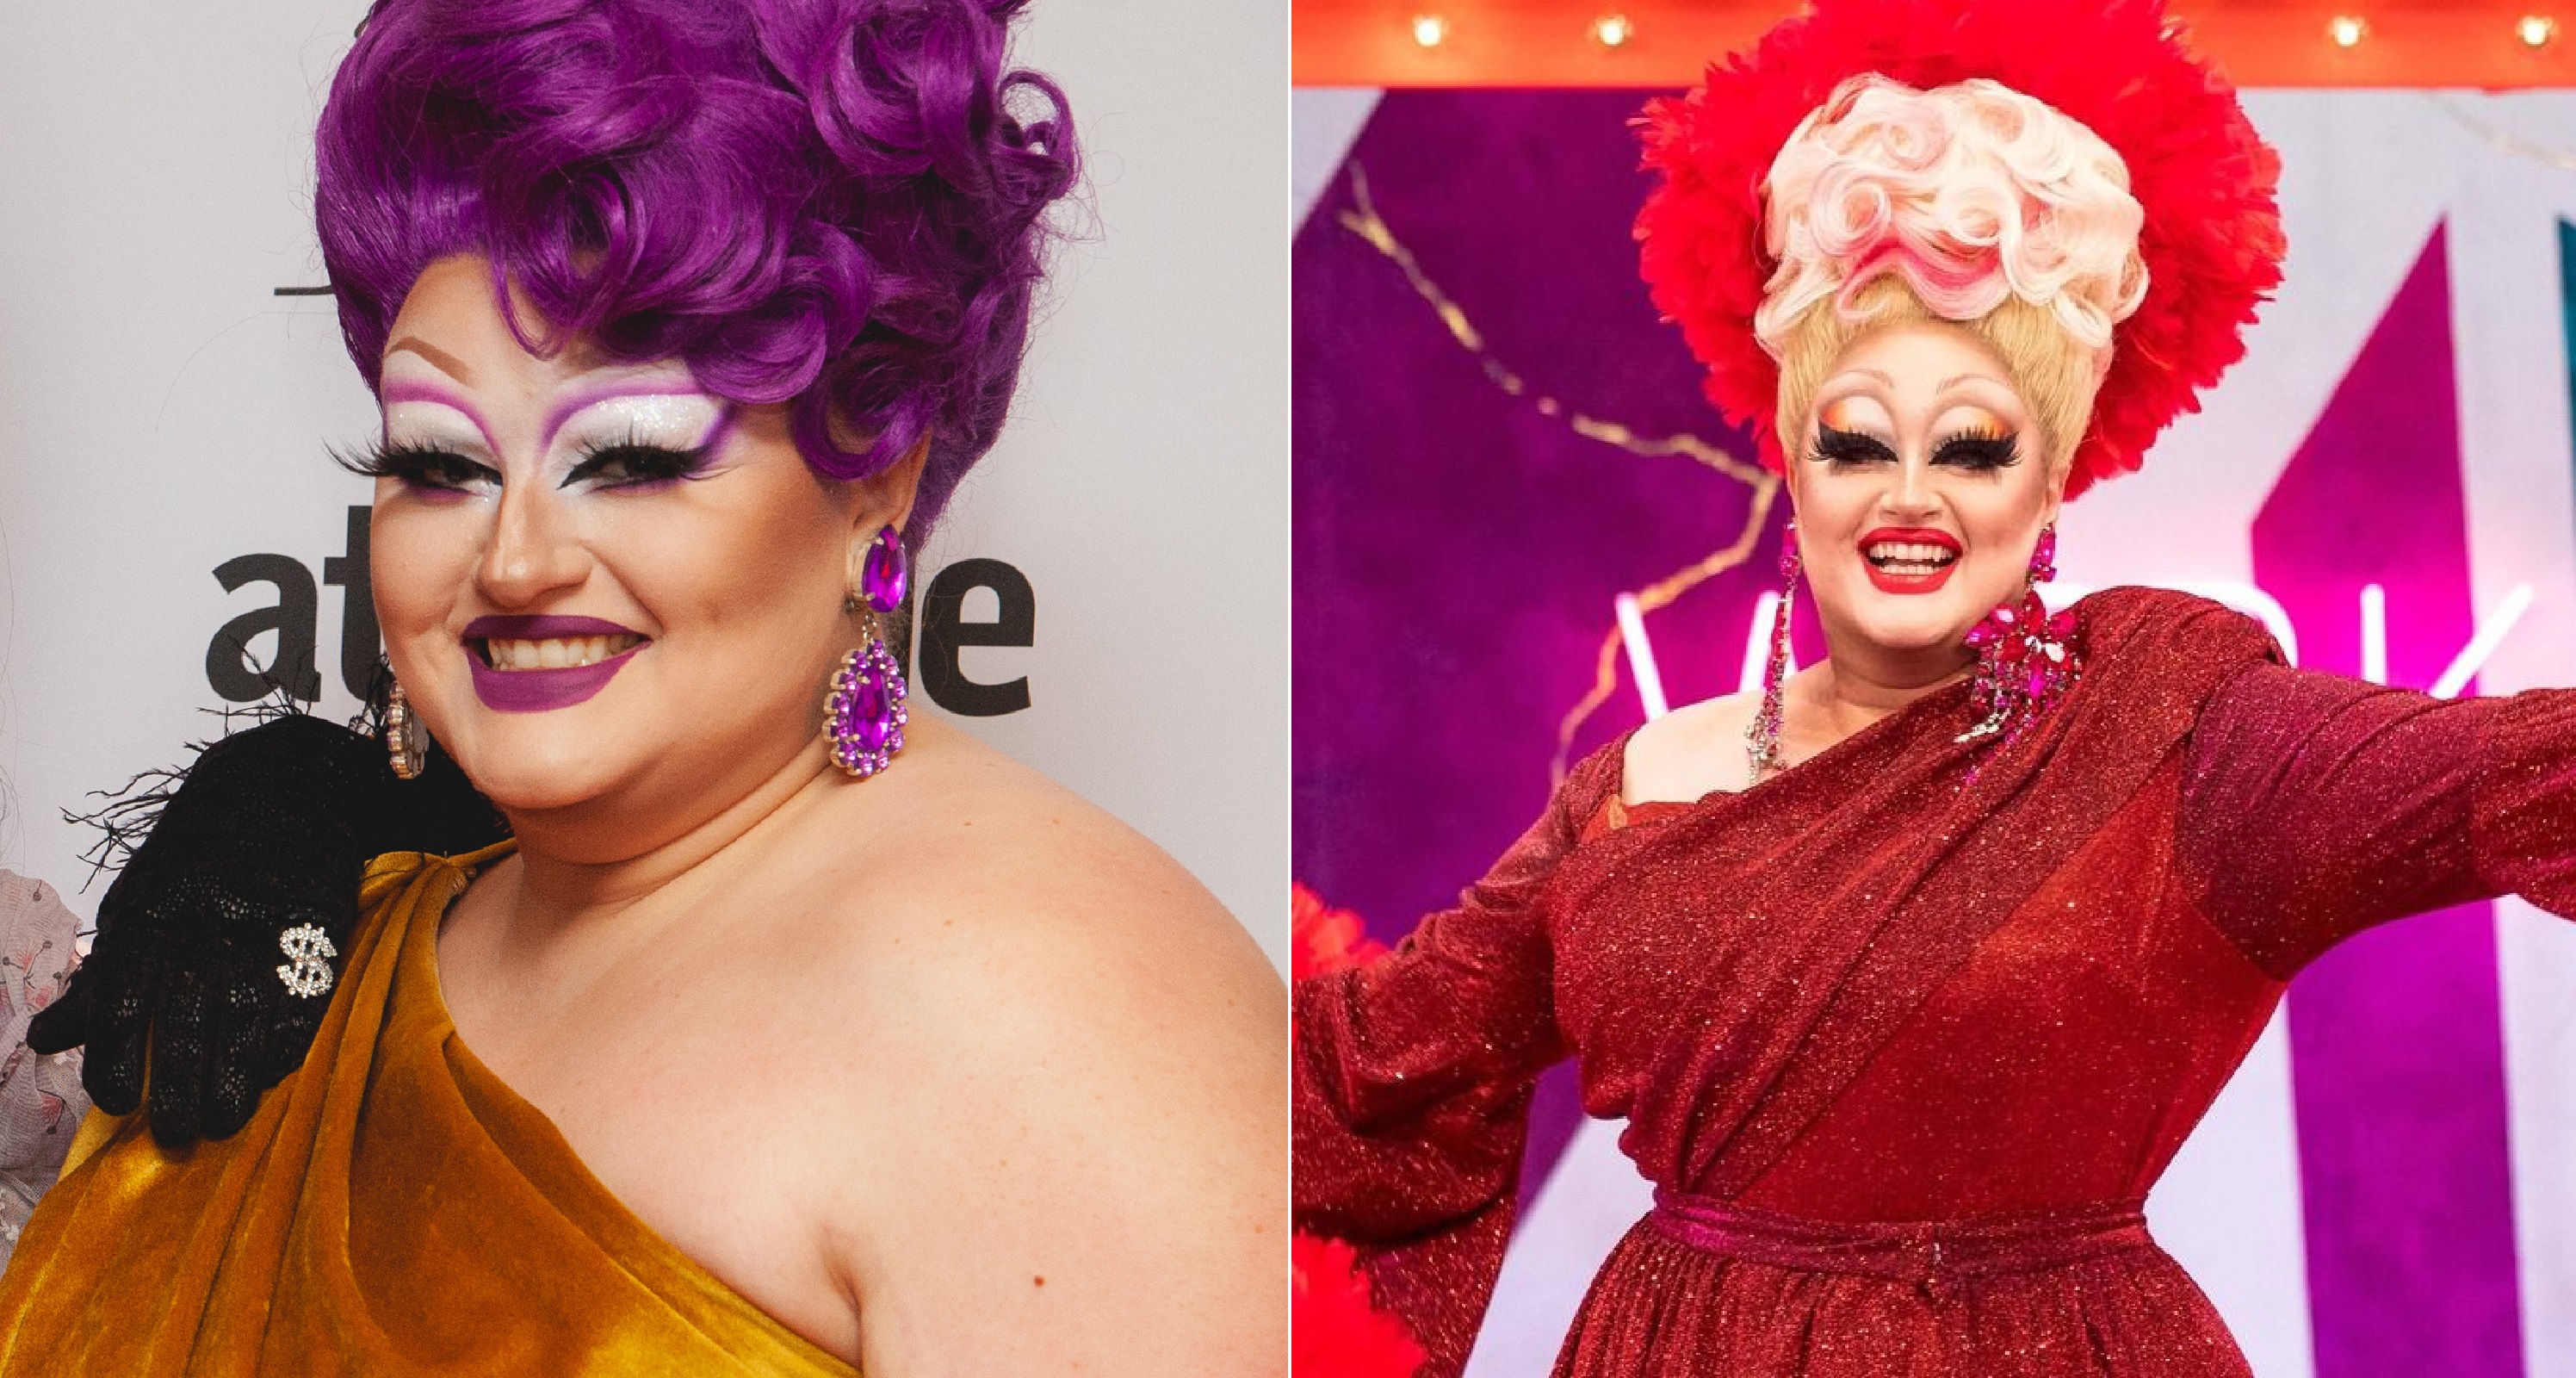 Victoria Scone addresses Drag Race UK future after exit - and says ...